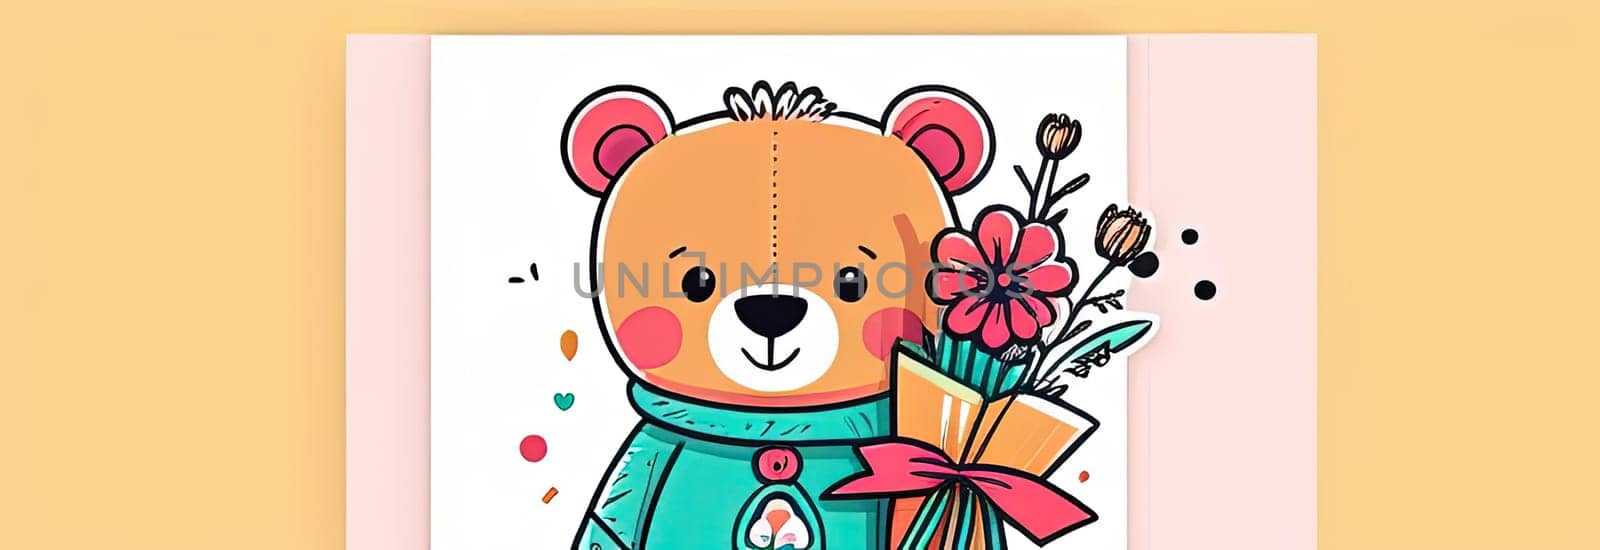 Teddy bear is holding bouquet of flowers isolated on pastel background. Concept of birthday and warmth, affection as teddy bear is symbol of love and comfort. Flowers add touch of beauty, color. by Angelsmoon